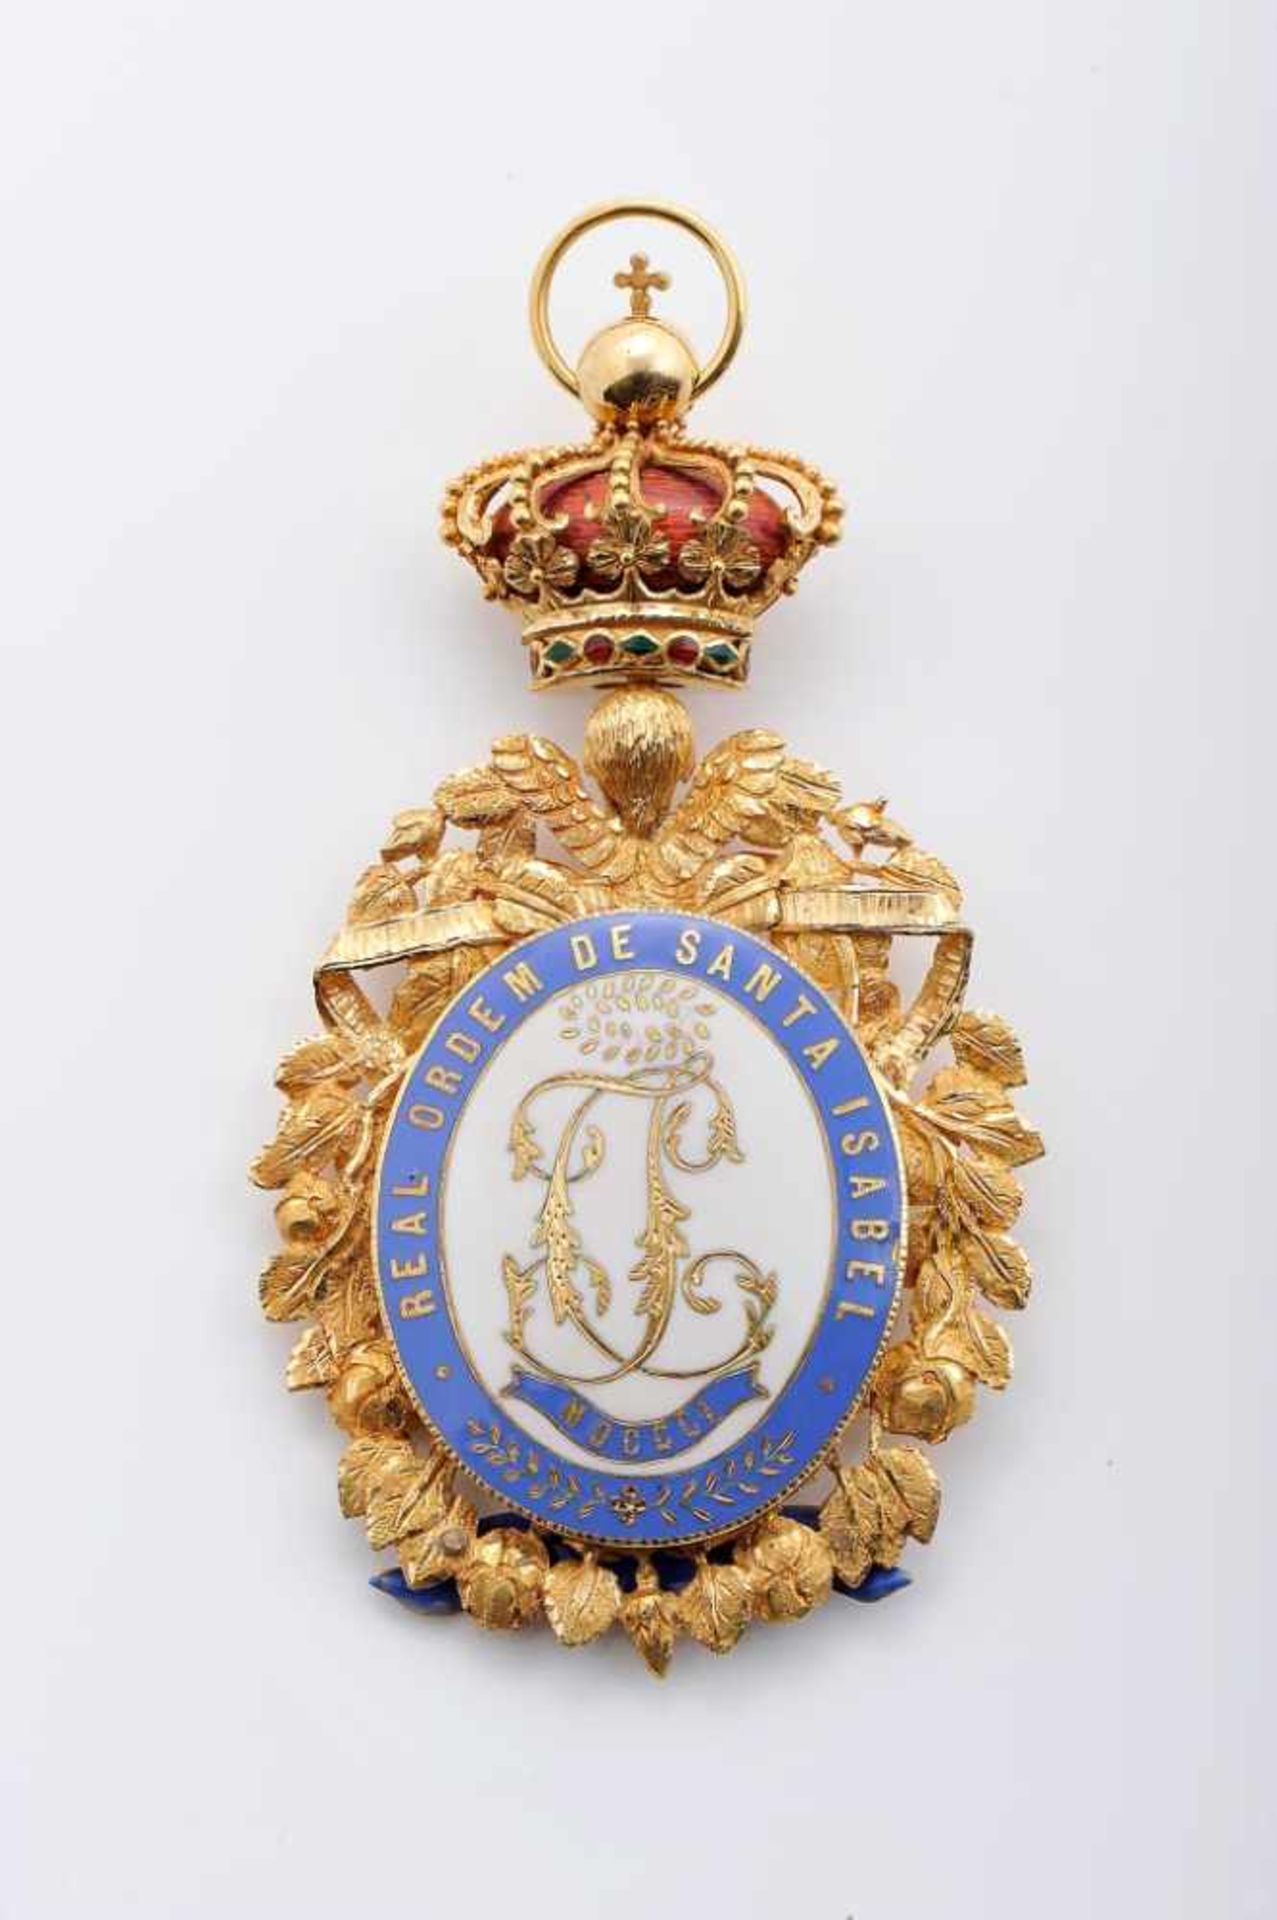 Insignia of the Portuguese Royal Order of Queen Saint IsabelInsignia of the Portuguese Royal Order - Bild 2 aus 2